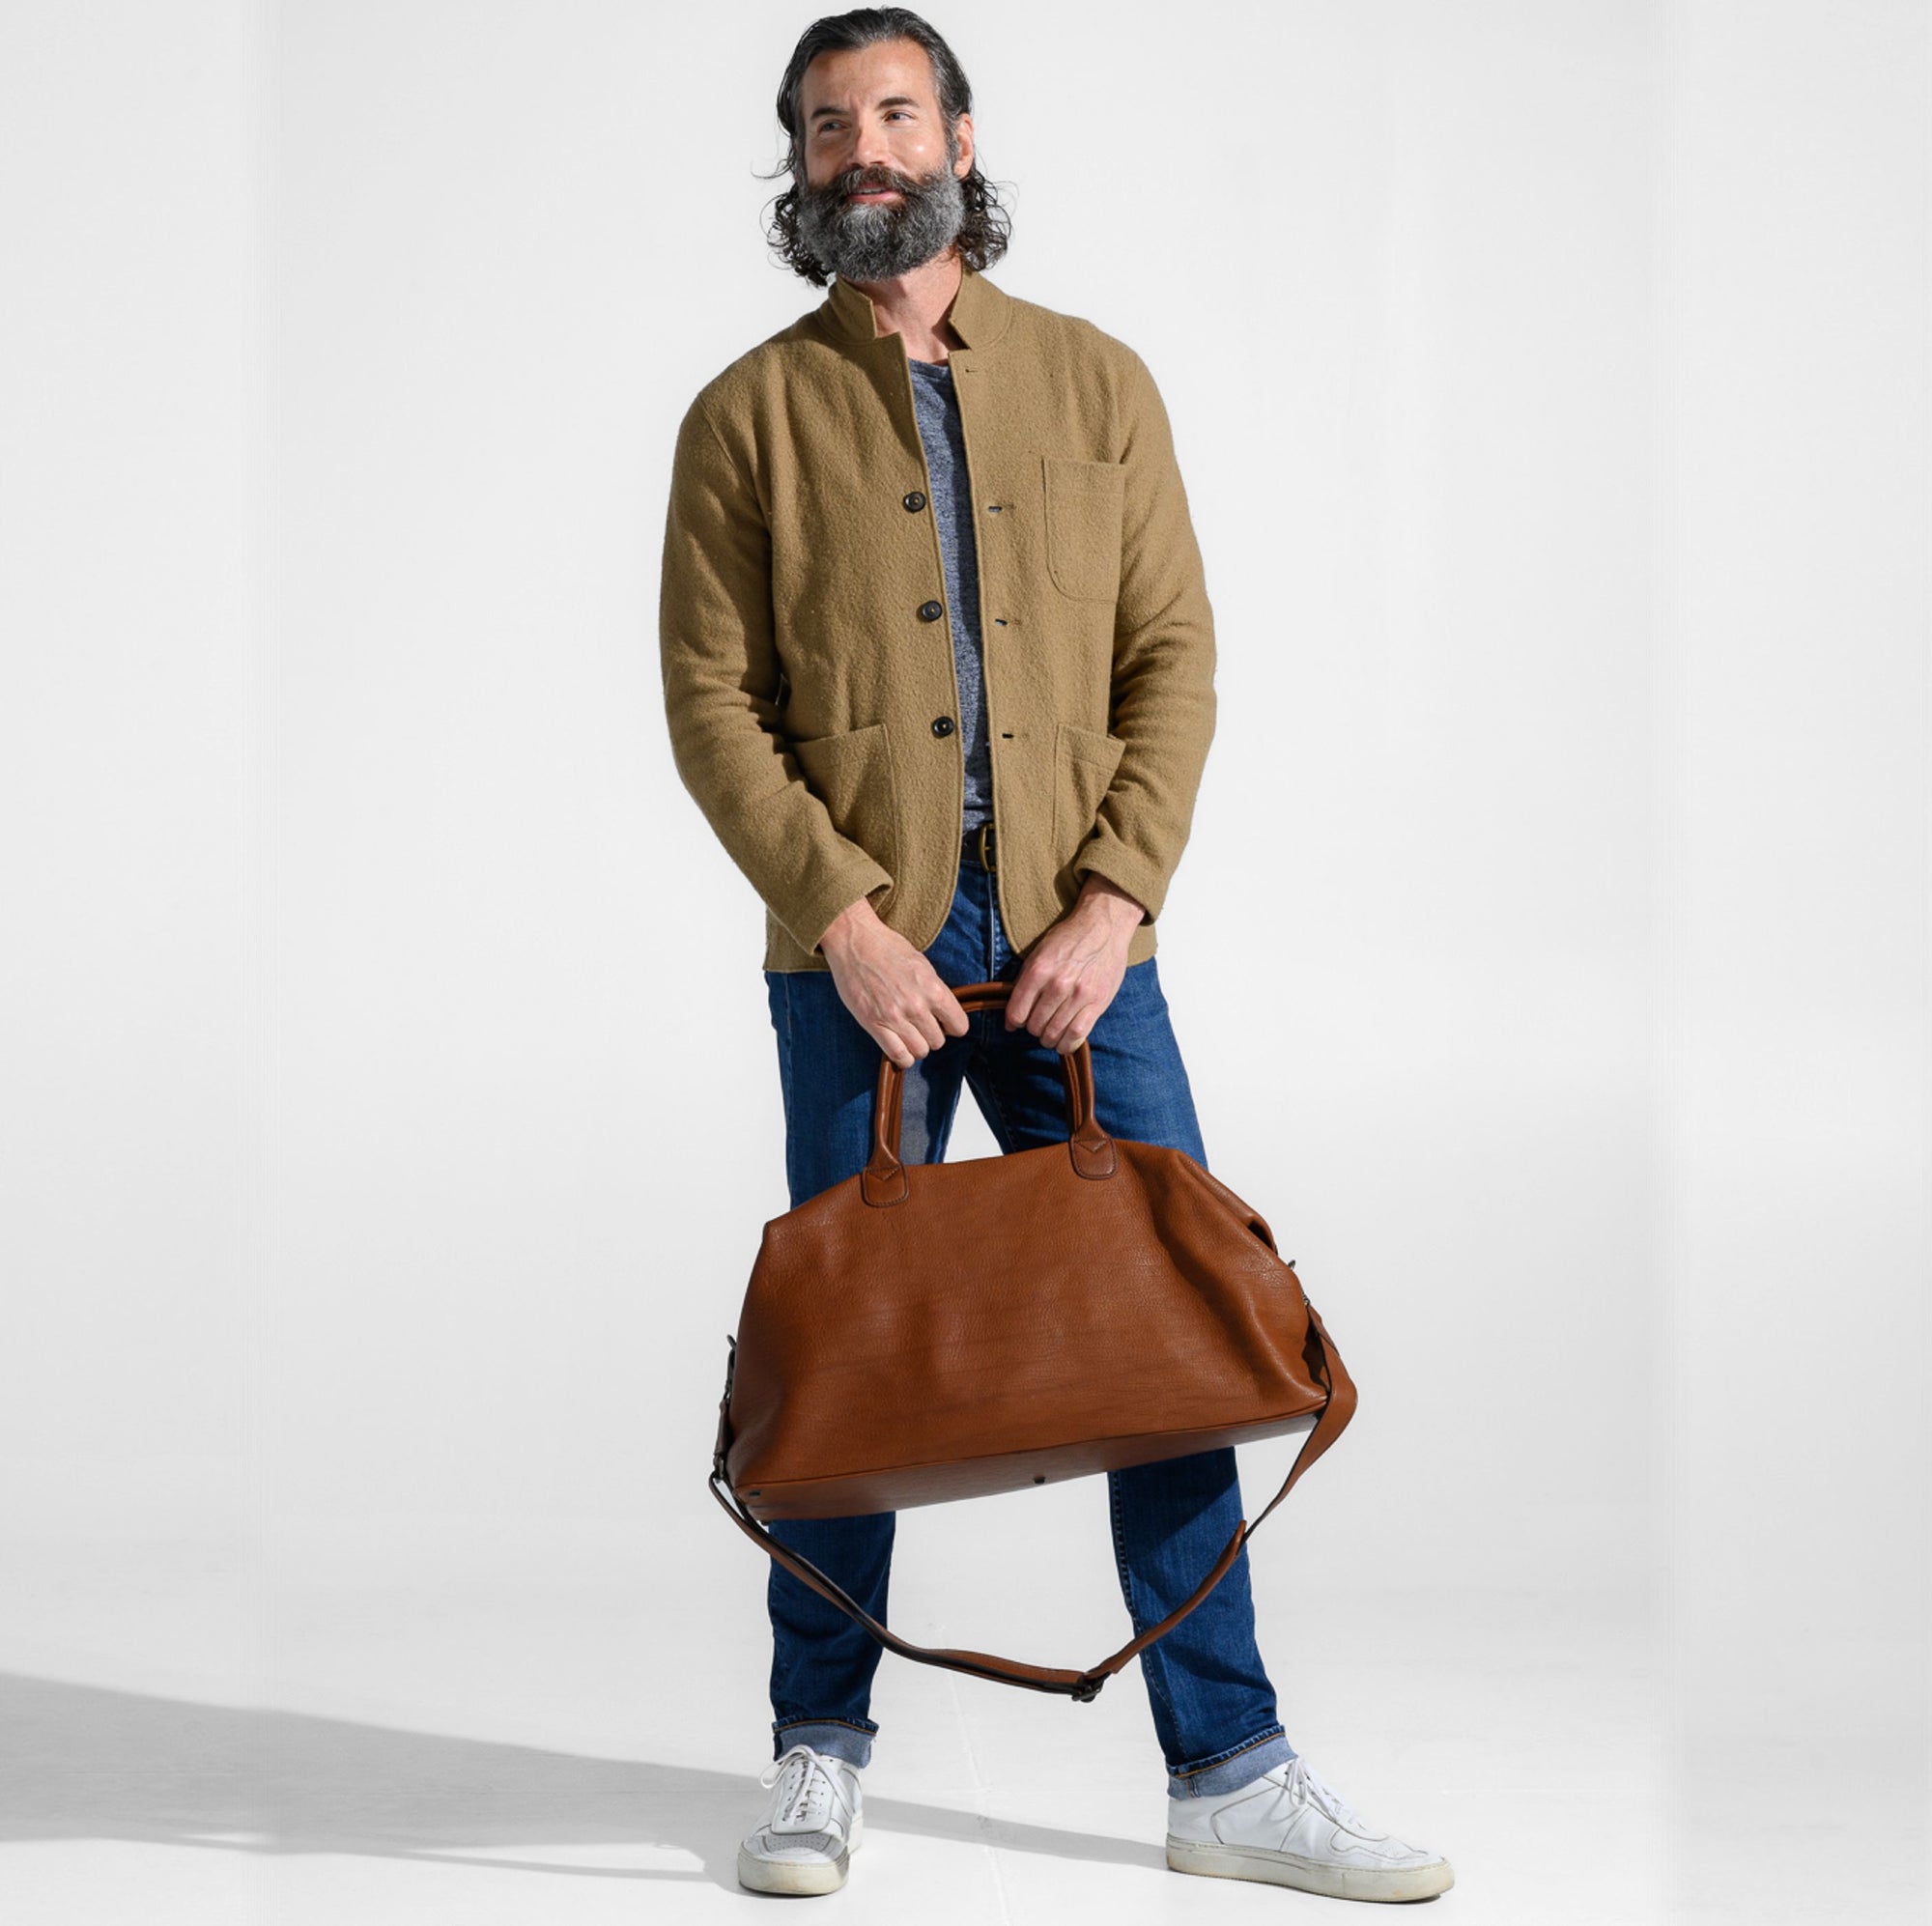 Benedict Leather Weekend Bag - Leather Bags by Moore & Giles